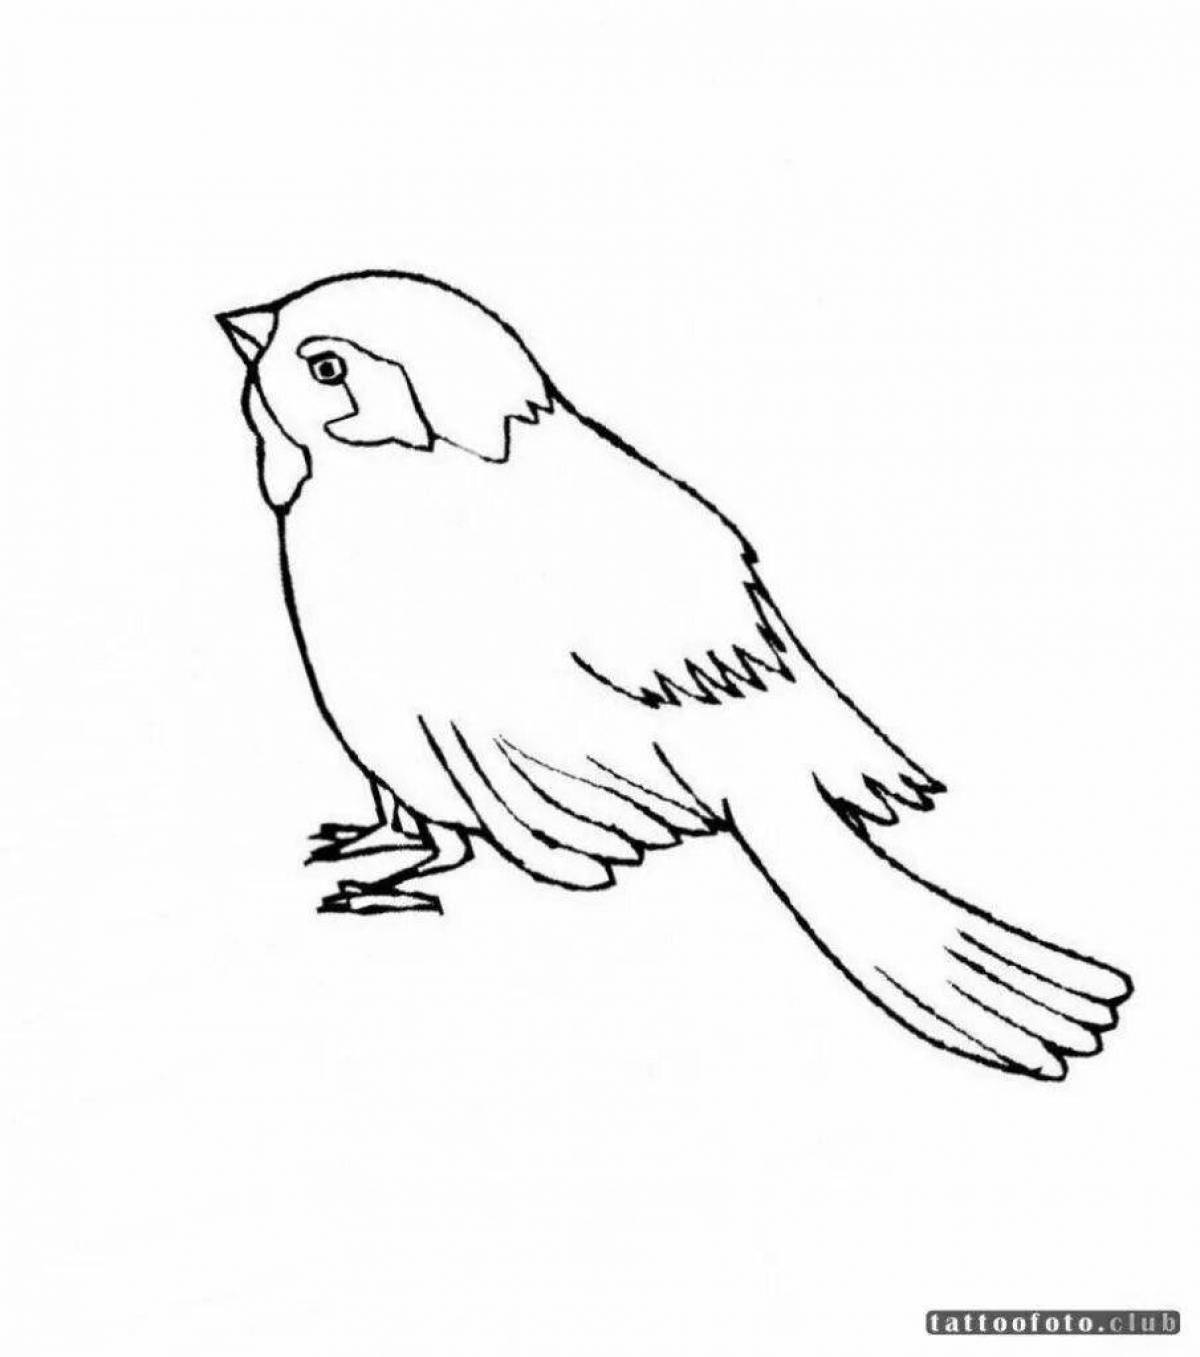 Coloring book dazzling sparrow for children 3-4 years old